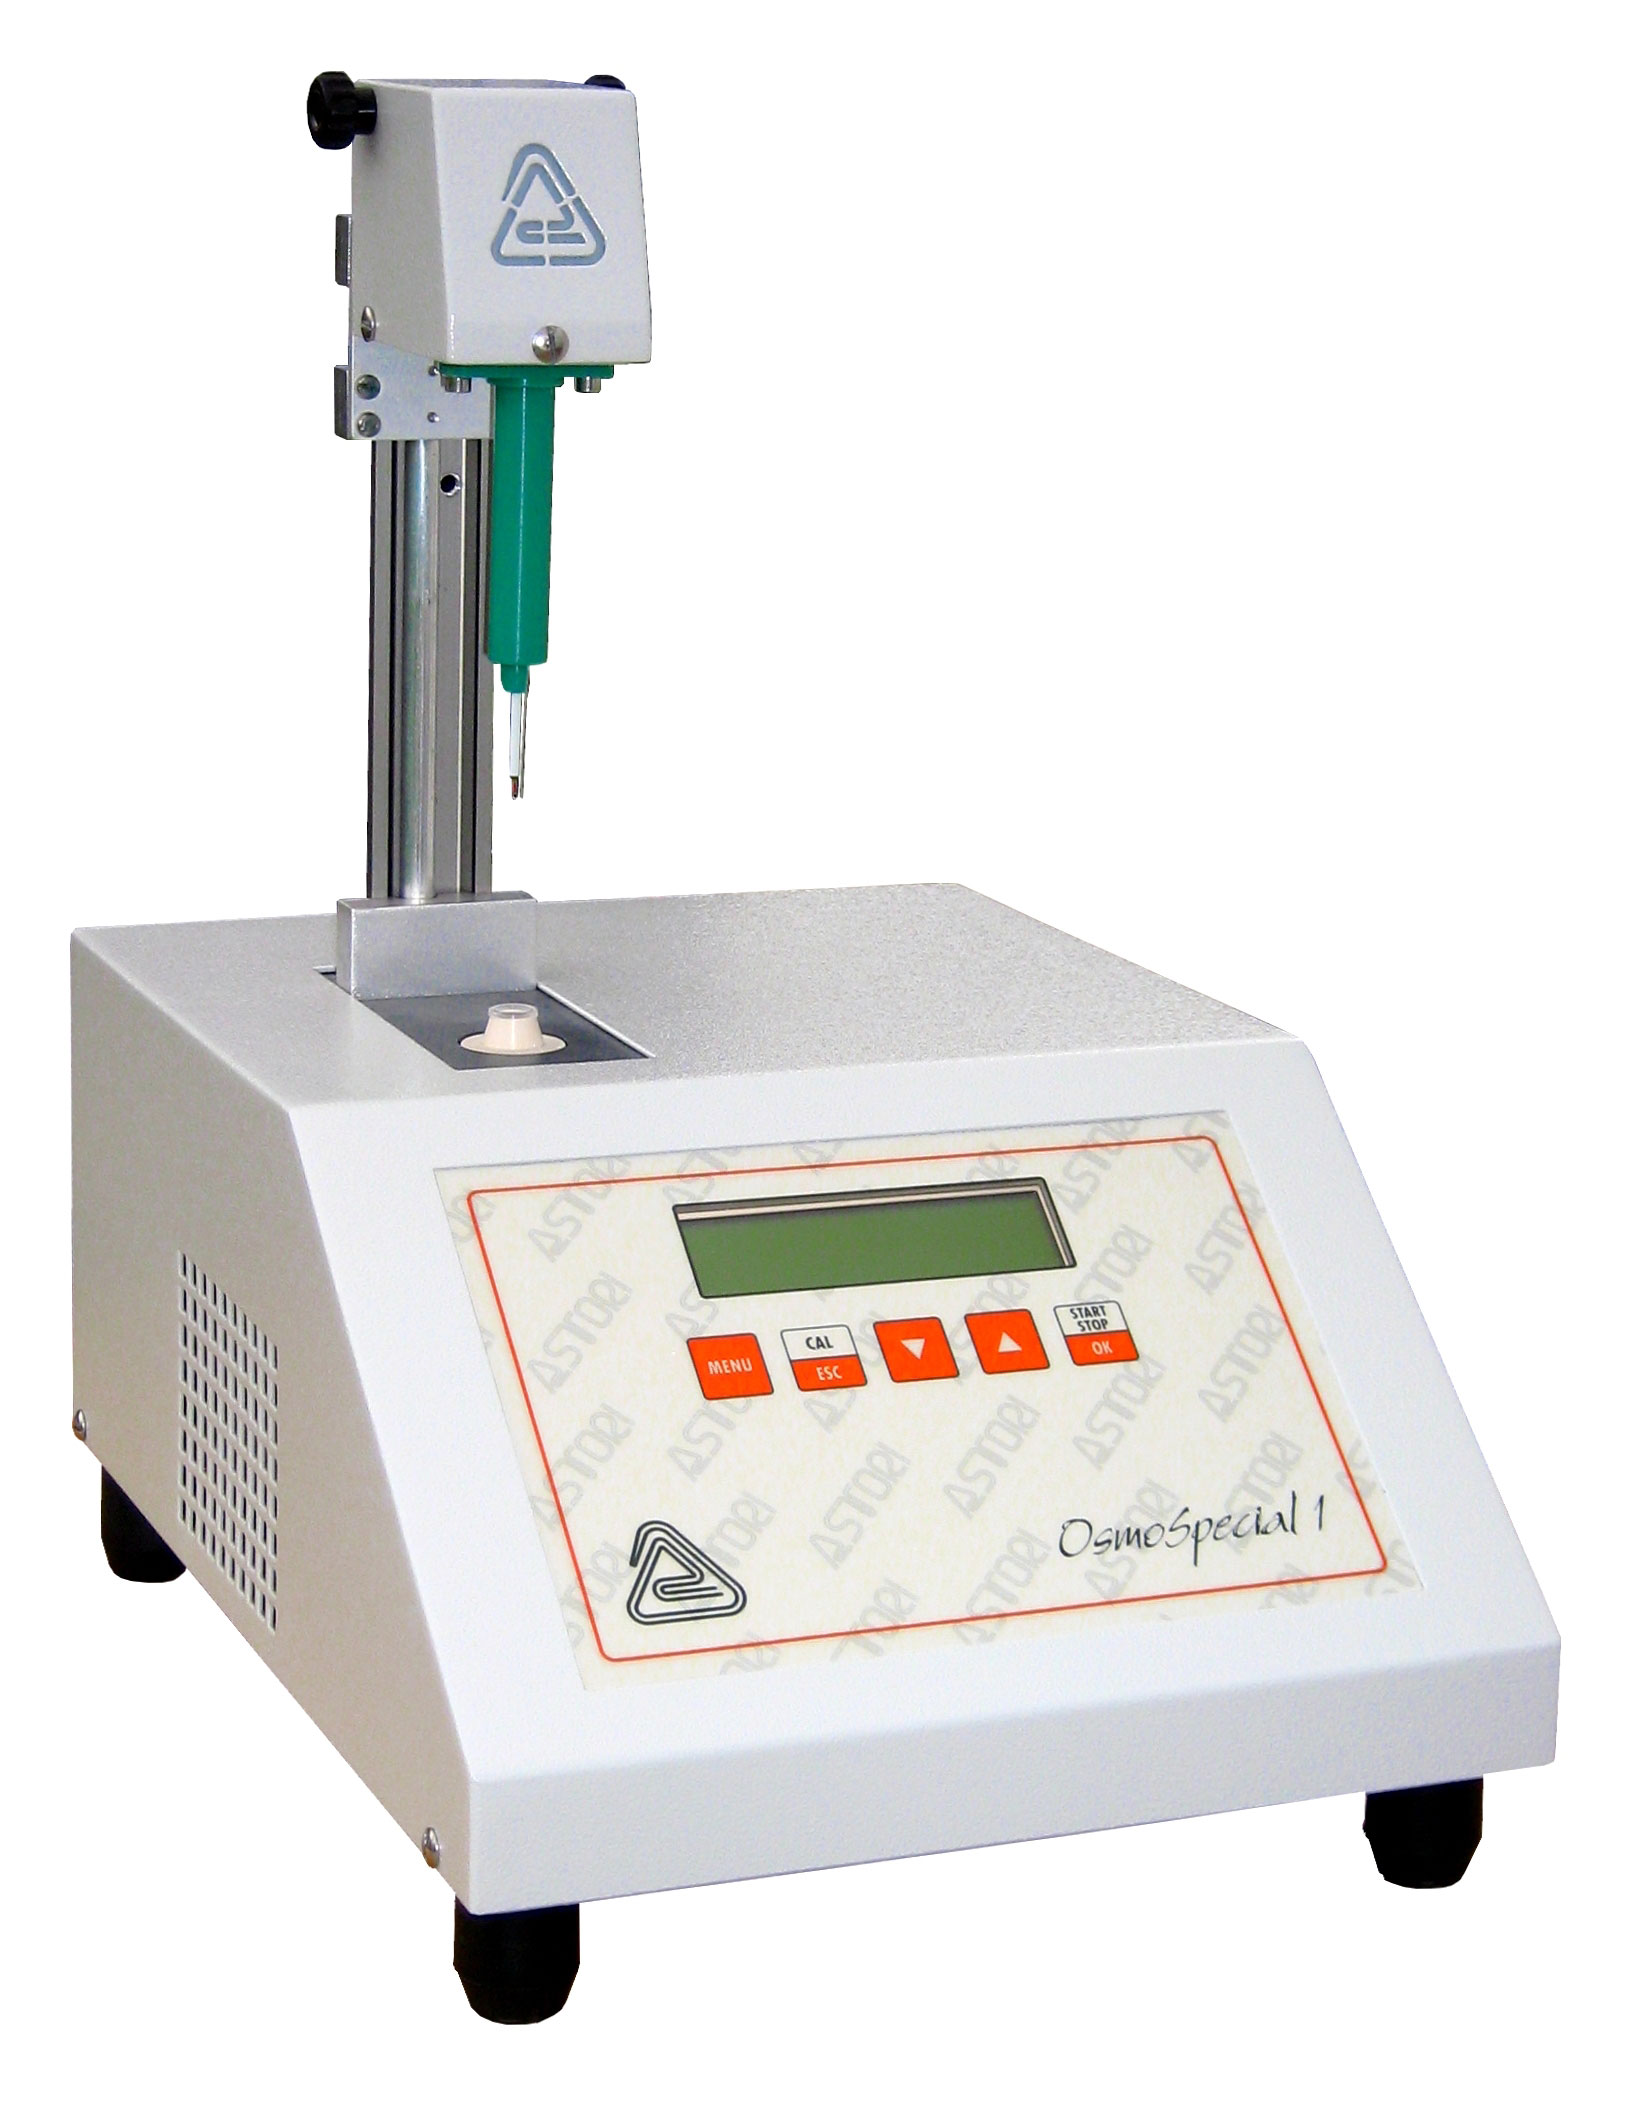 OsmoSpecial 1 semiautomatic osmometer. ASTORI TECNICA. Number of samples: 1. Sample volume (µl): 50 - 200. Measurement range (mOsm/Kg): 0 - 1500. Resolution (mOsm/Kg): 1. Repeatability/Reproducibility (mOsm/Kg): ±2 (from 0 to 600), ±0,5% (from 600 to 1500). Dim. WxHxD (mm): 285x450x380 (with head up). Weight (kg): 10.Supplied with a 'starter-kit' including a box of disposable tubes, a tube-holder, 3 calibration standards and a cooling liquid bottle.